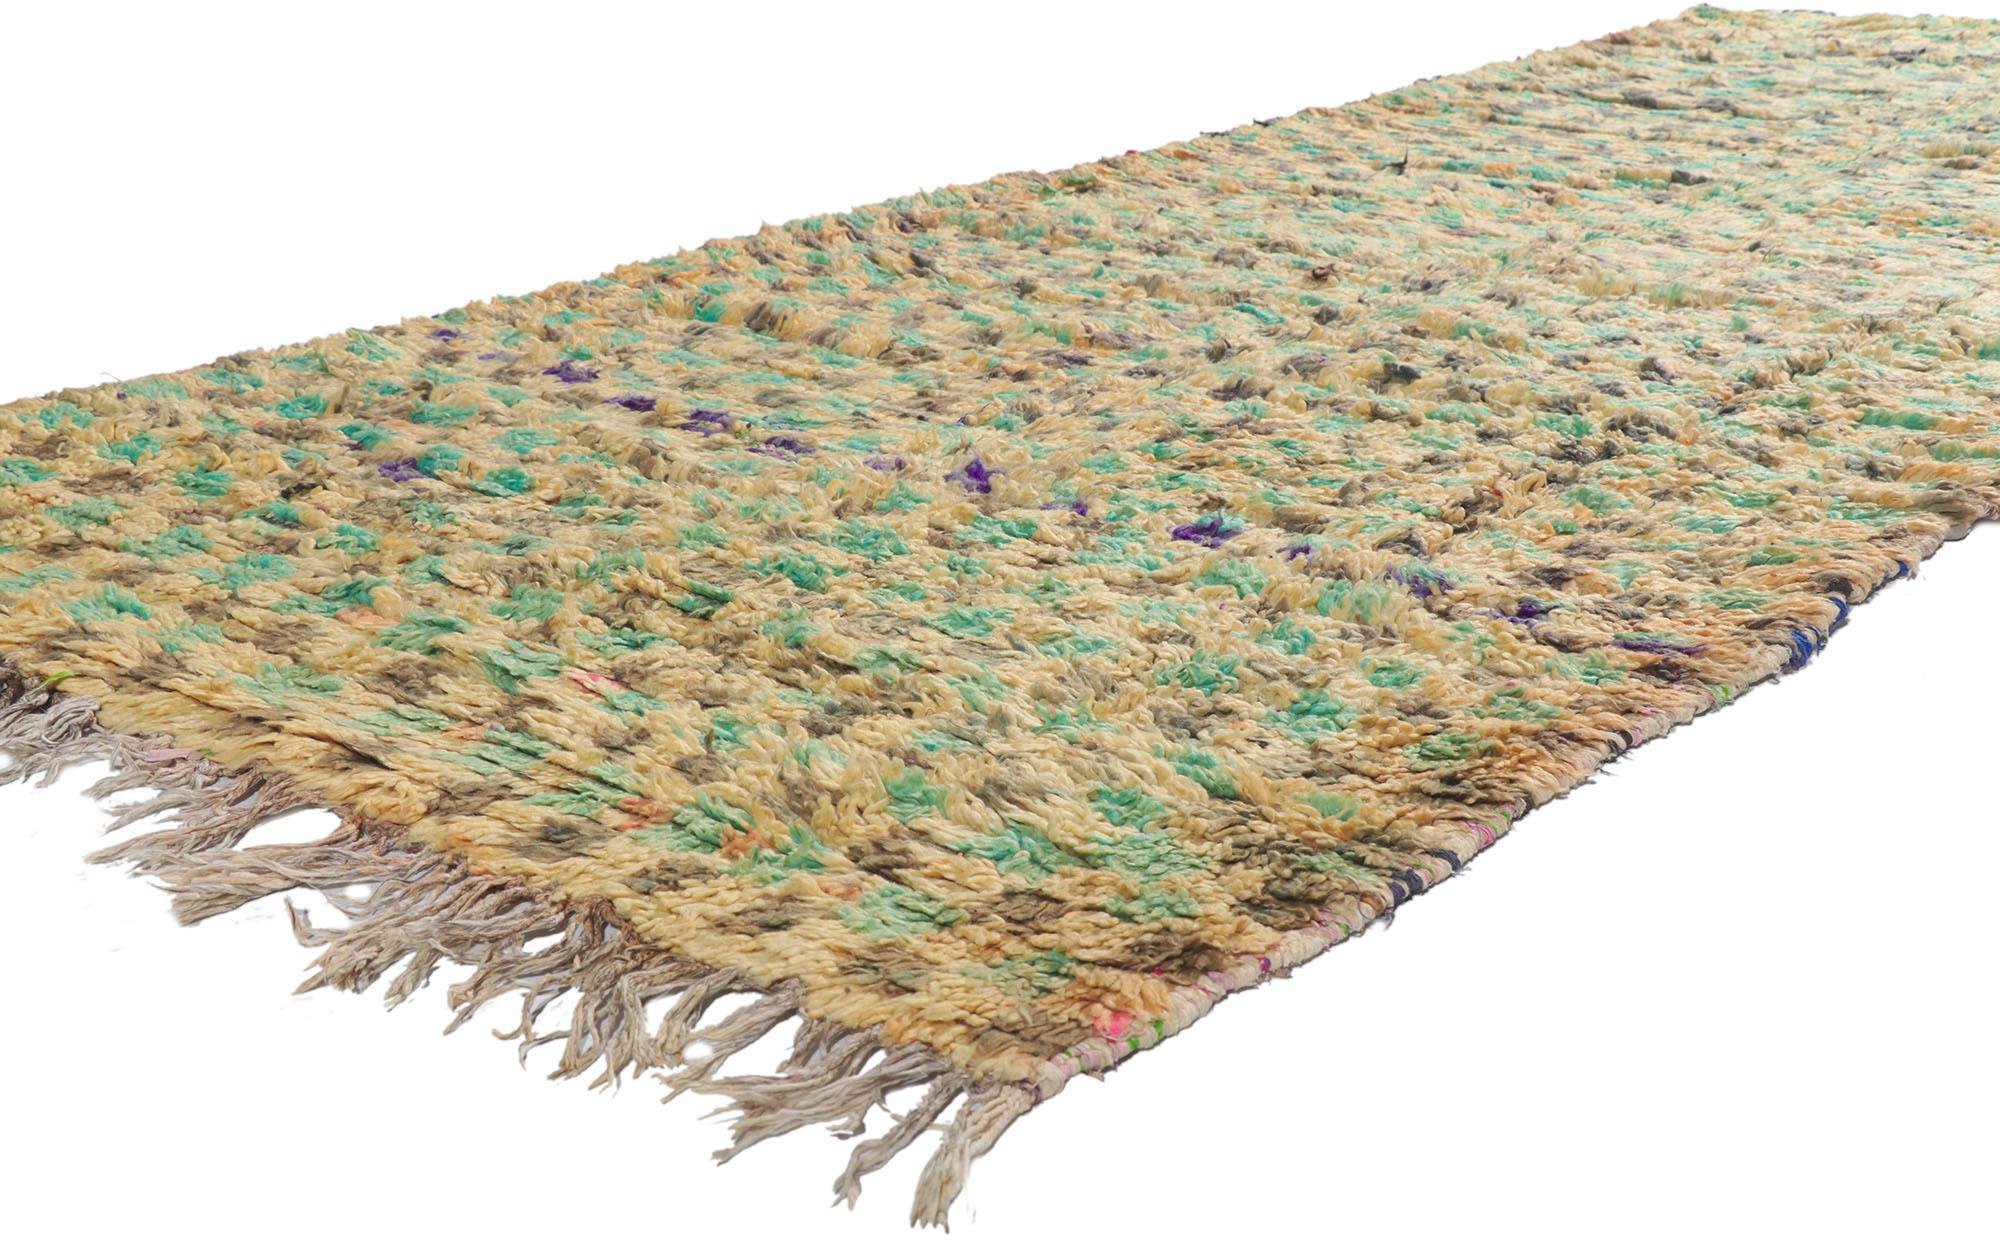 ??21496 Vintage Berber Moroccan Boucherouite Rag rug 04'03 x 10'00. ?With its expressive tribal design, incredible detail and texture, this hand knotted vintage Berber Moroccan Boucherouite rug is a captivating vision of woven beauty. The